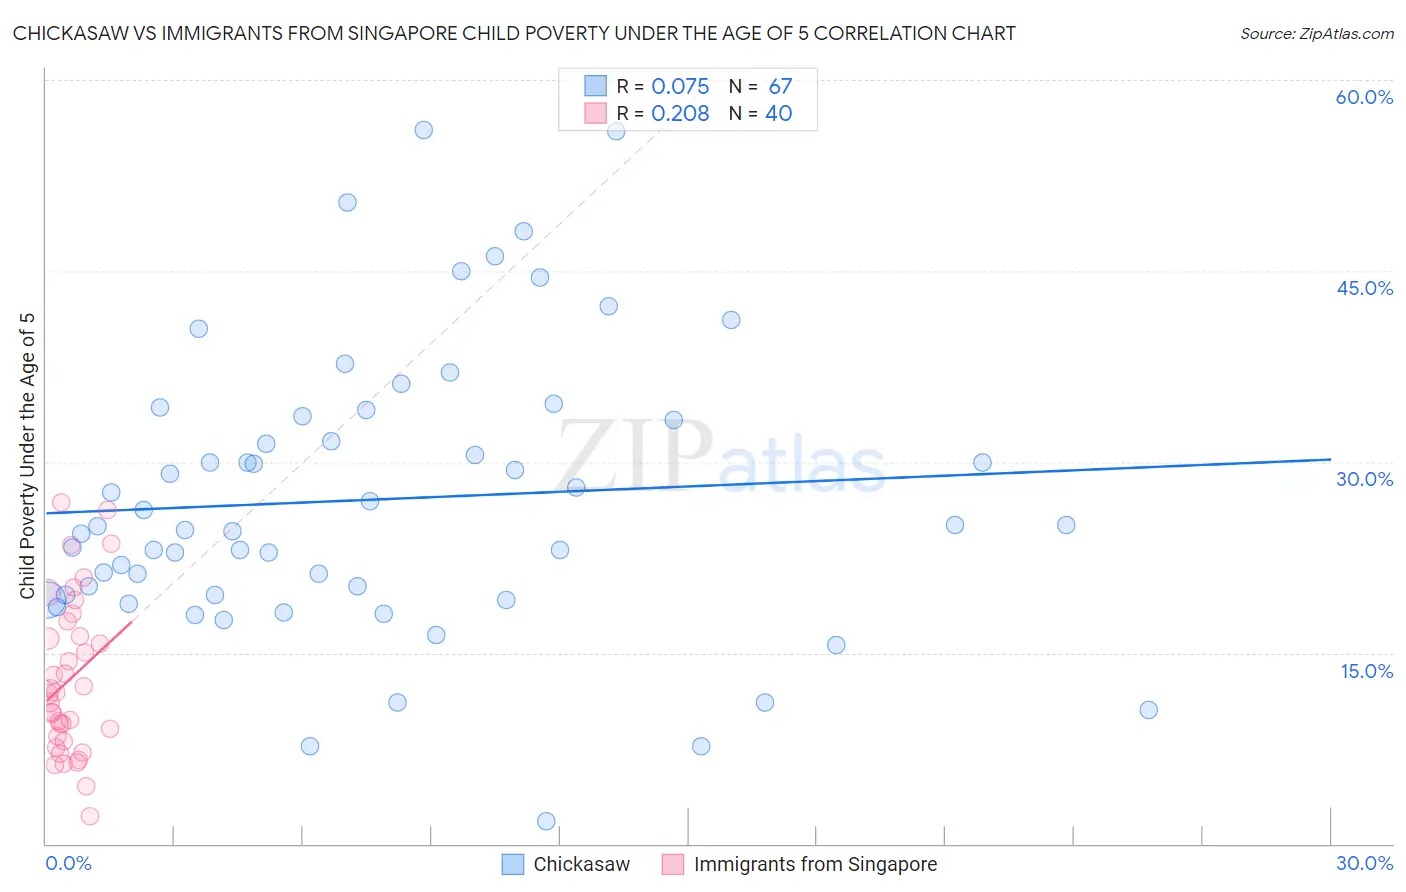 Chickasaw vs Immigrants from Singapore Child Poverty Under the Age of 5